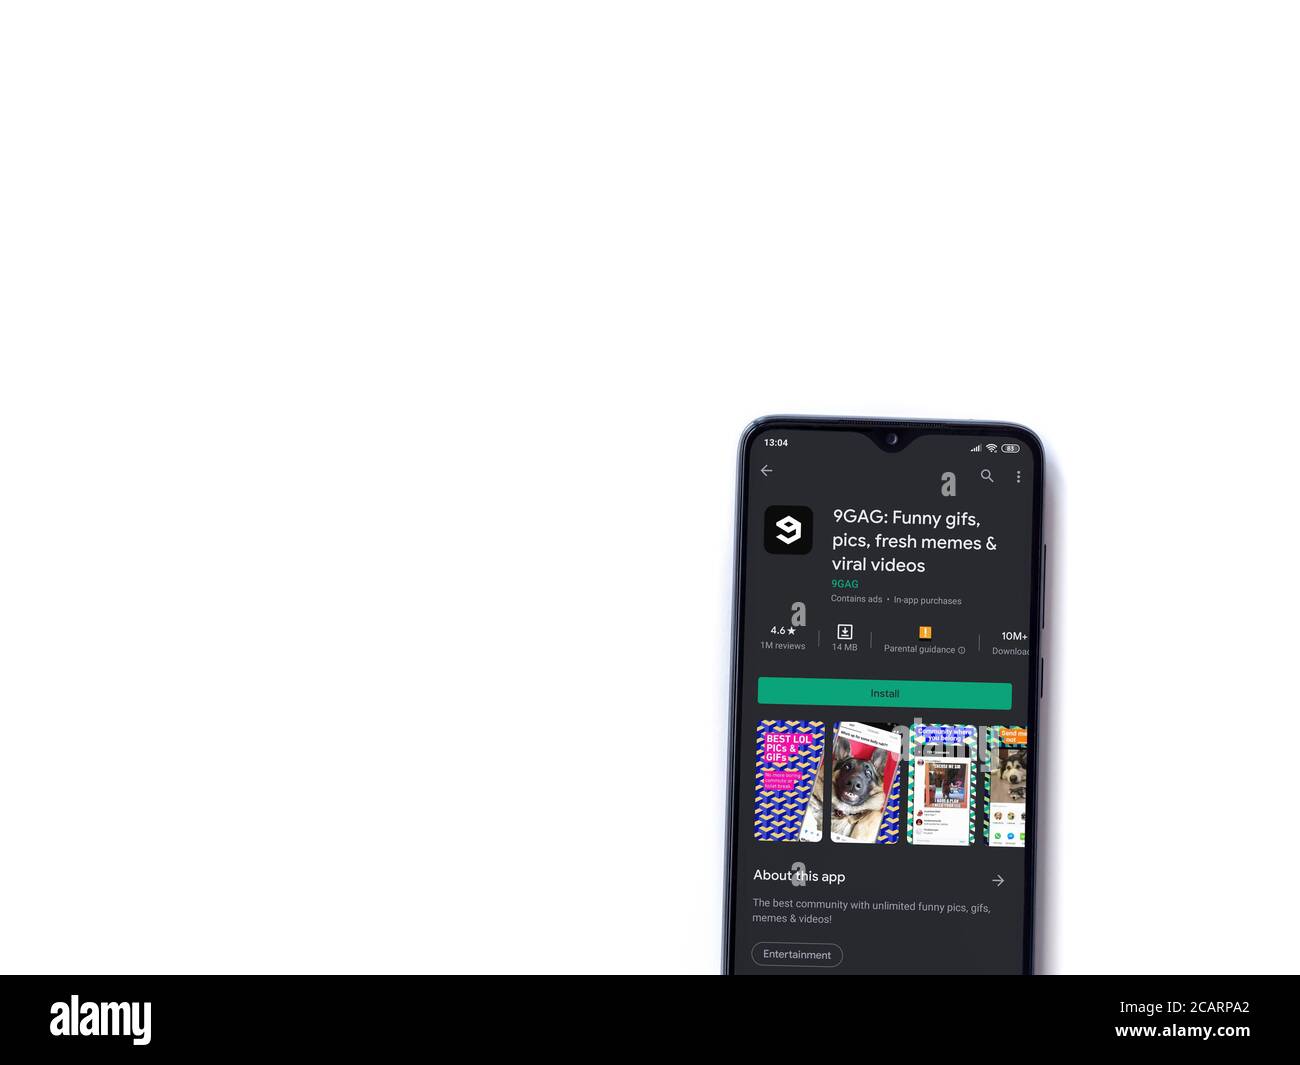 Lod, Israel - July 8, 2020: 9GAG app play store page display a black mobile smartphone on white background. Top view flat lay with Stock Photo - Alamy